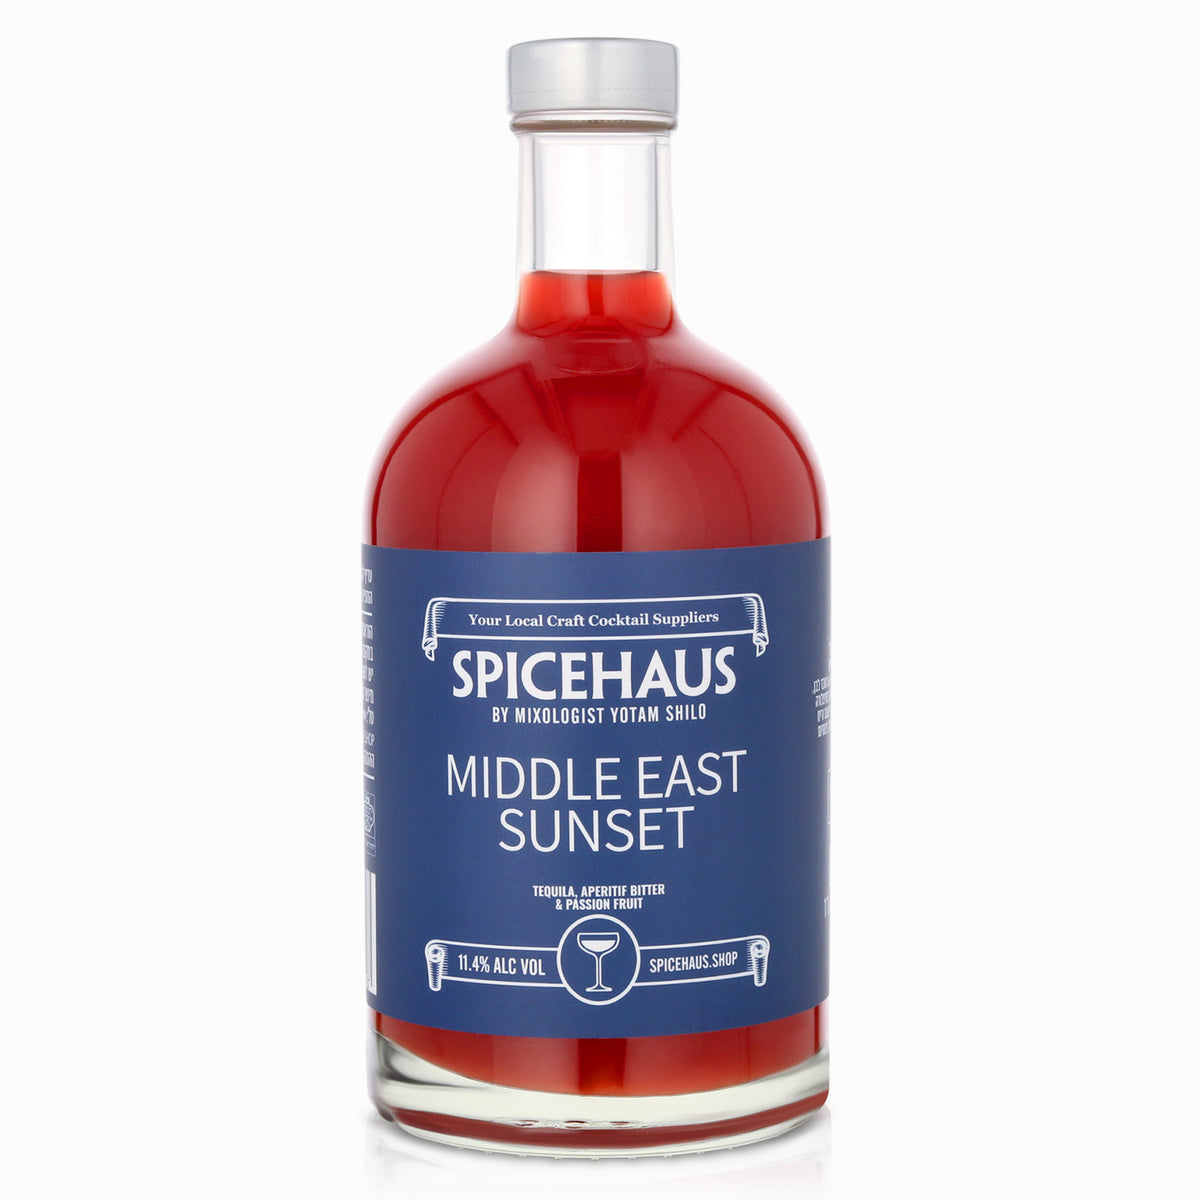 MIDDLE EAST SUNSET 500ml